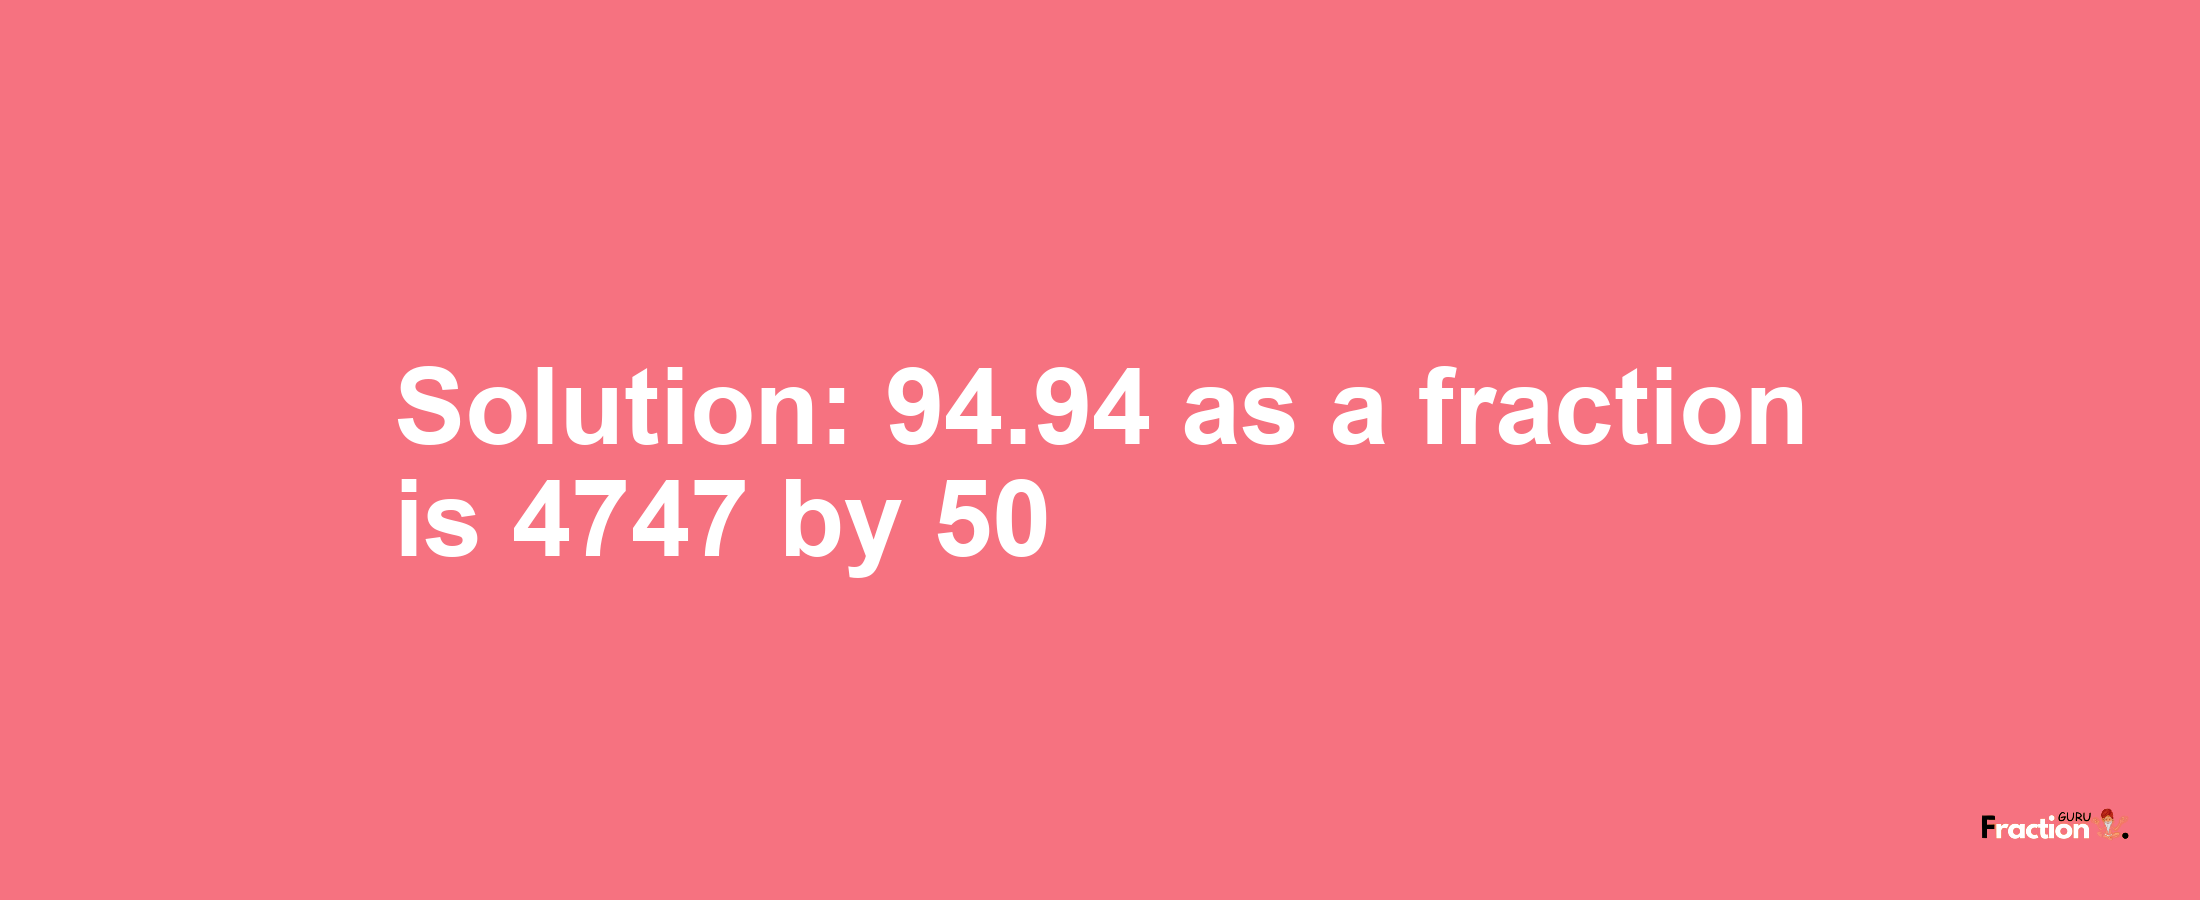 Solution:94.94 as a fraction is 4747/50